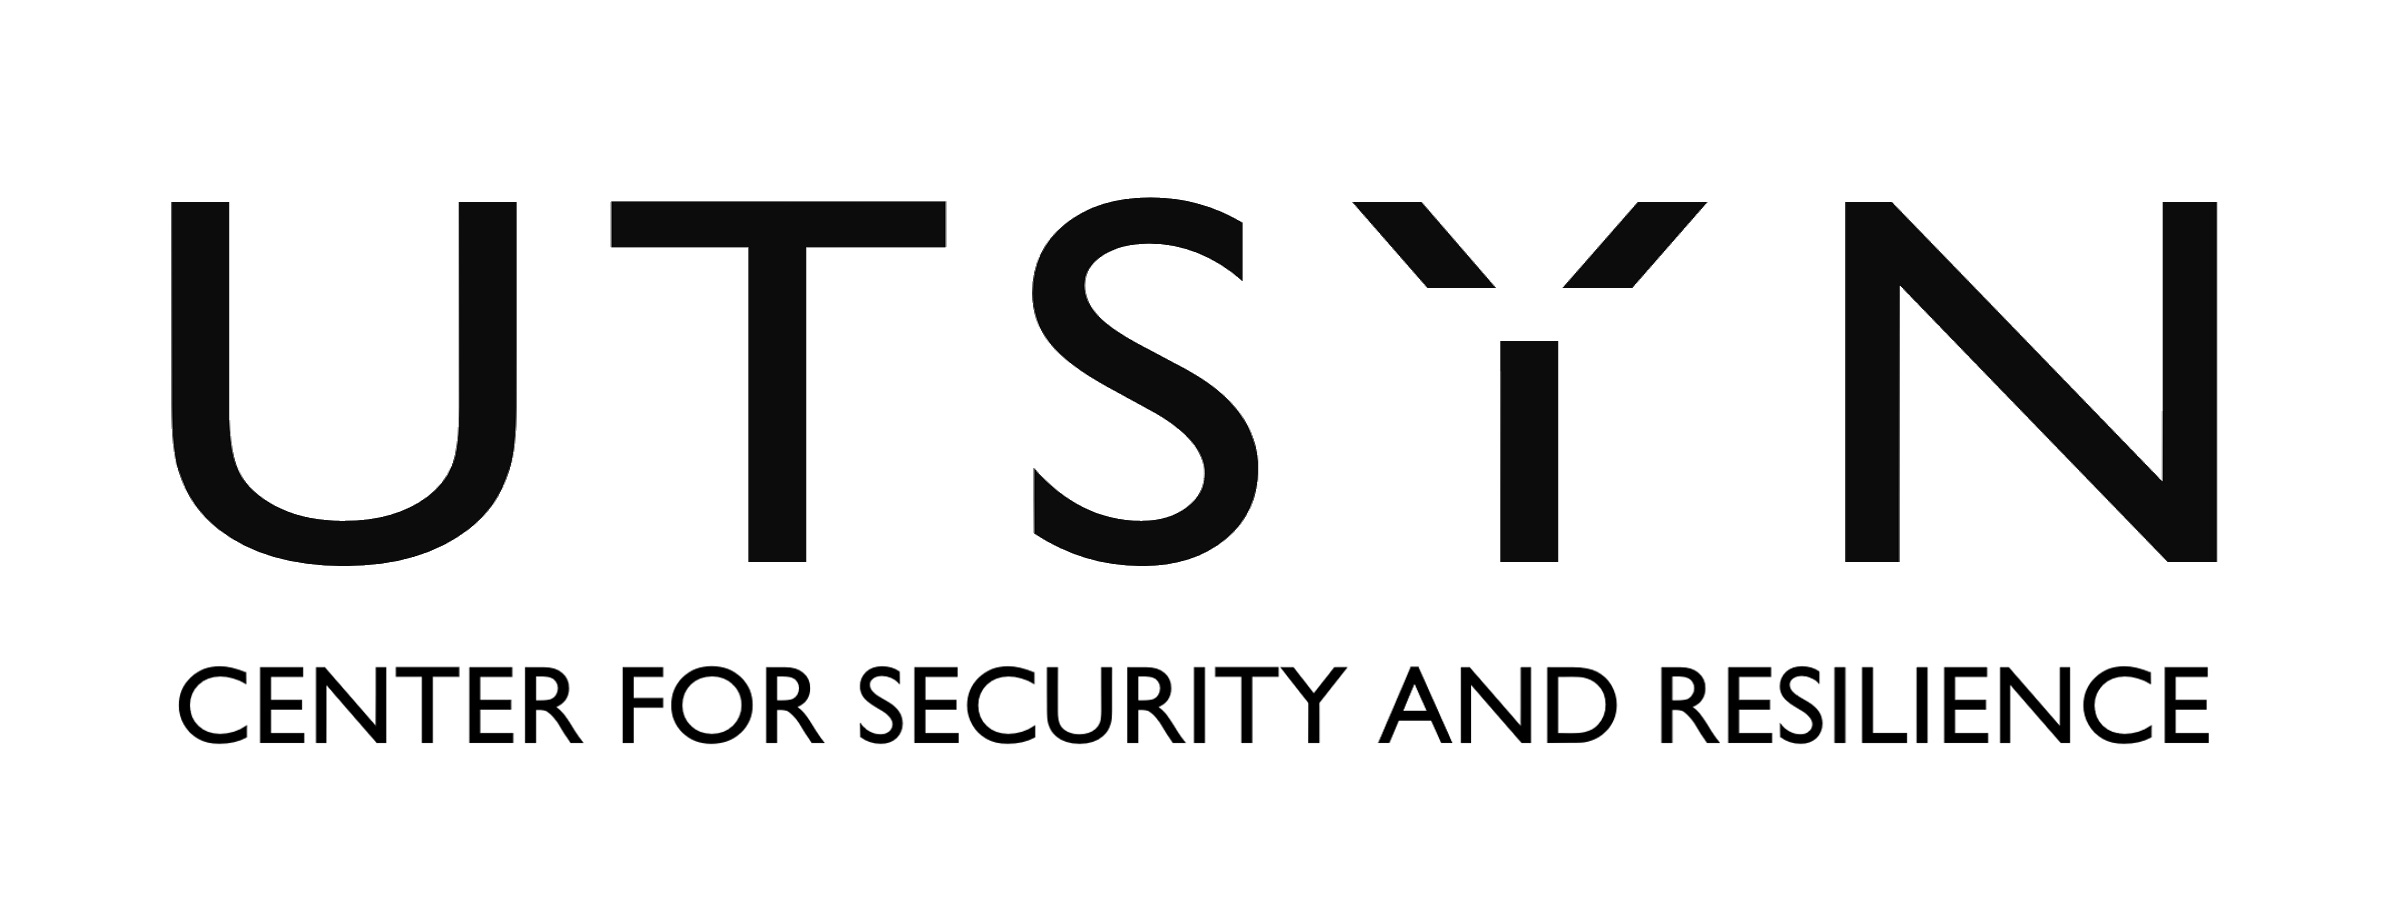 UTSYN - CENTER FOR SECURITY AND RESILIENCE - logo linked to frontpage